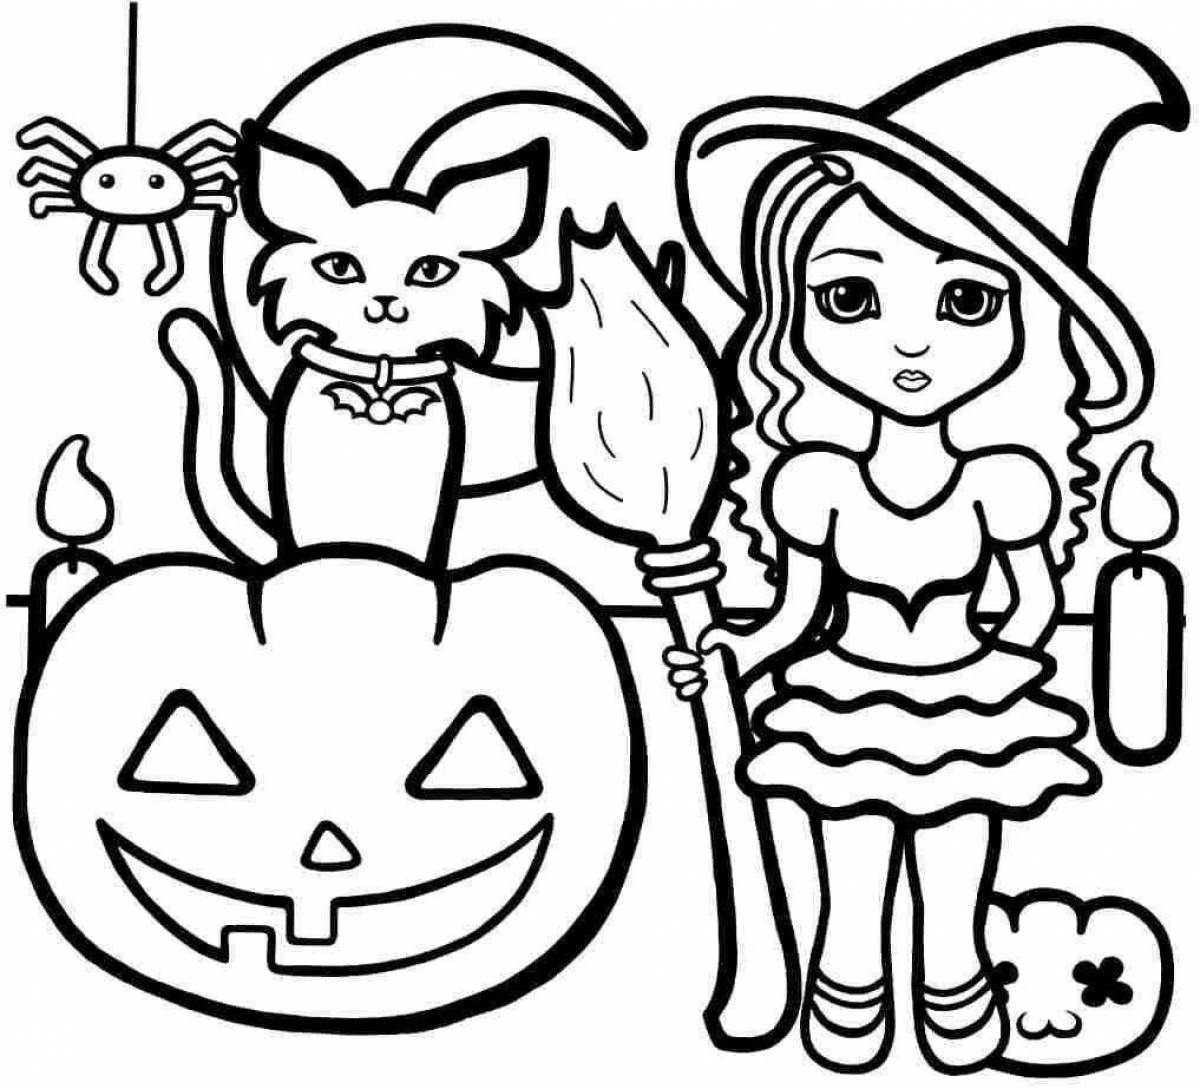 Adorable halloween coloring book for girls